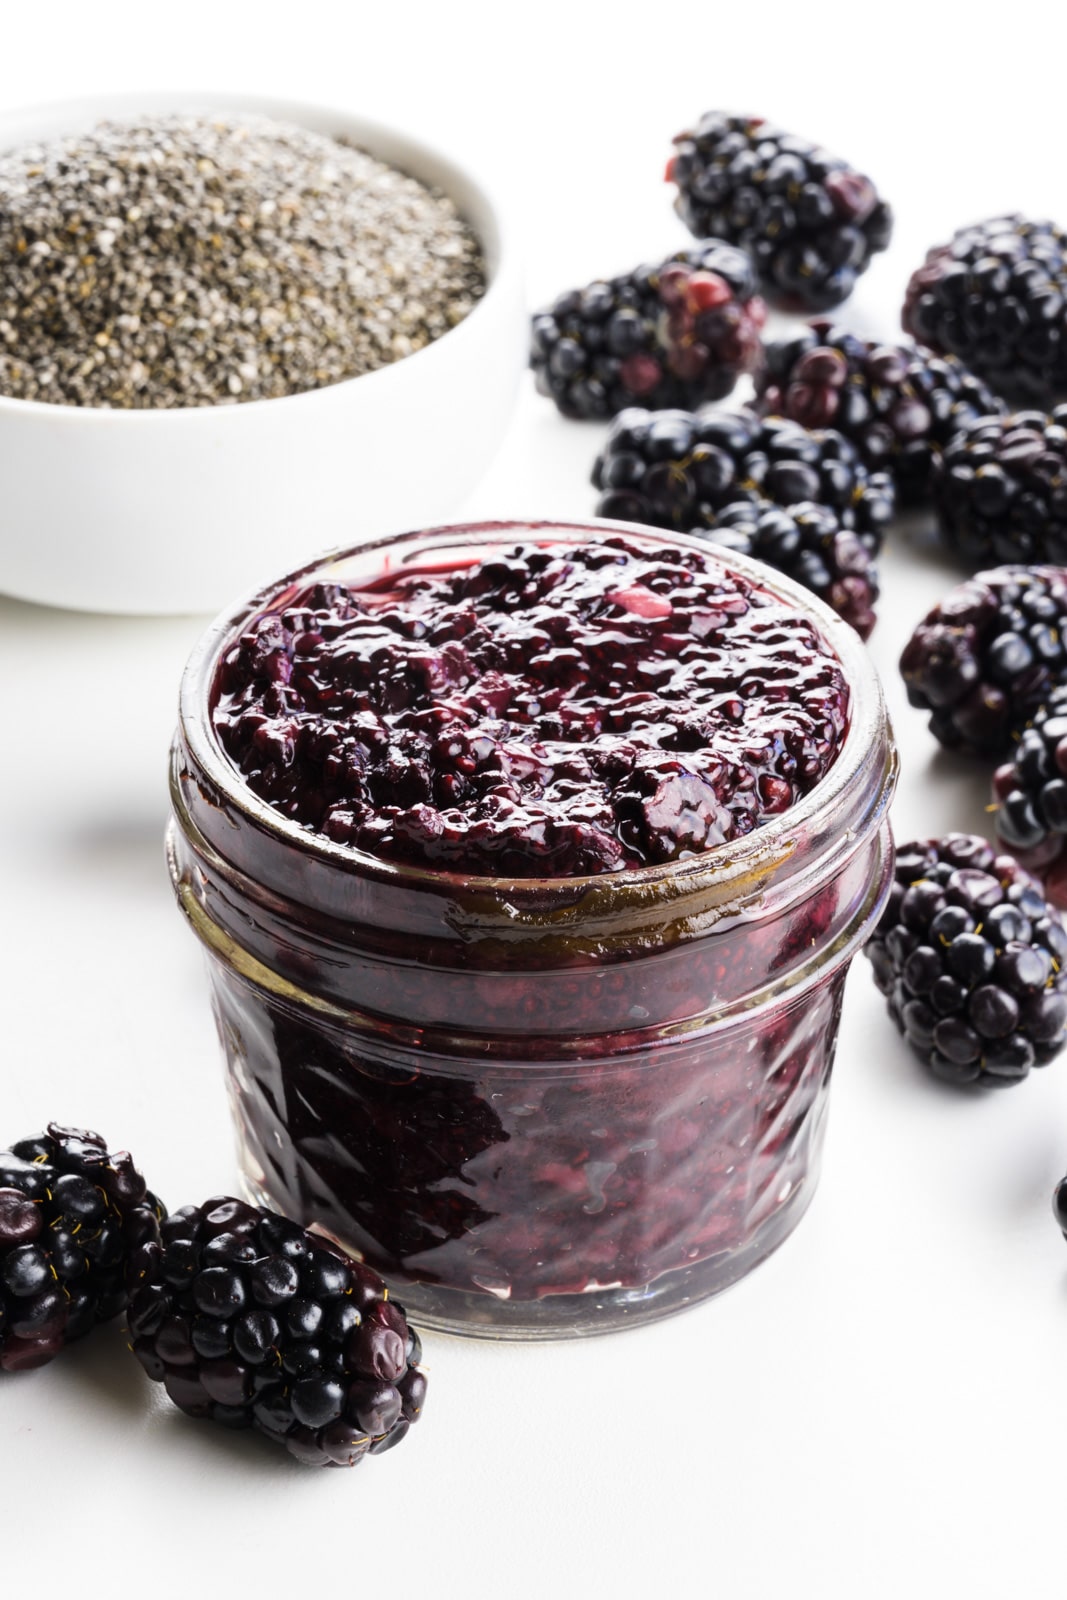 A small jar holds blackberry jam with fresh berries around it and a bowl of chia seeds behind it.